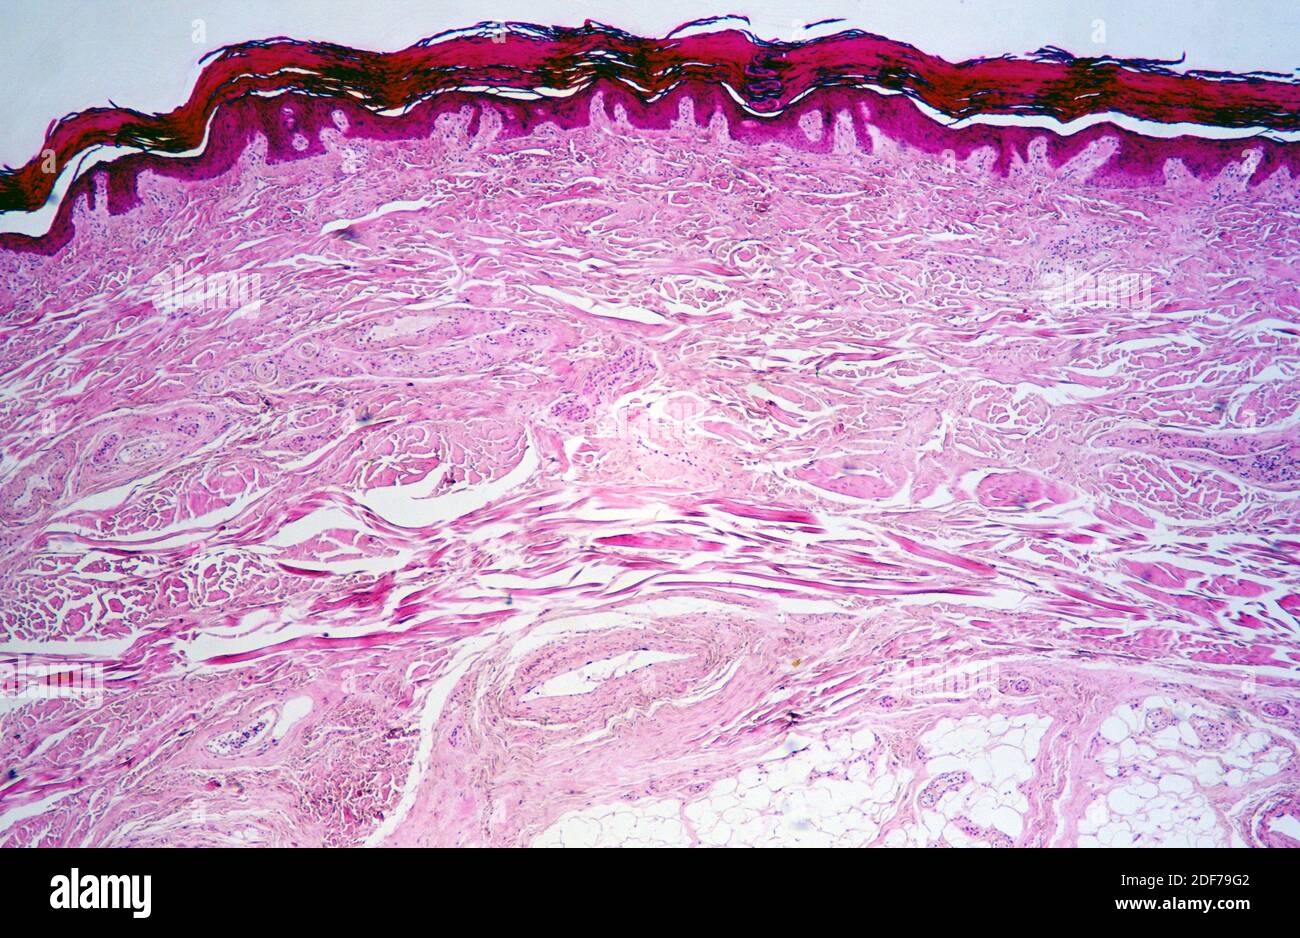 Human finger section showing epidermis (stratified squamous epithelium), dermis and connective tissues. Photomicrograph. Stock Photo